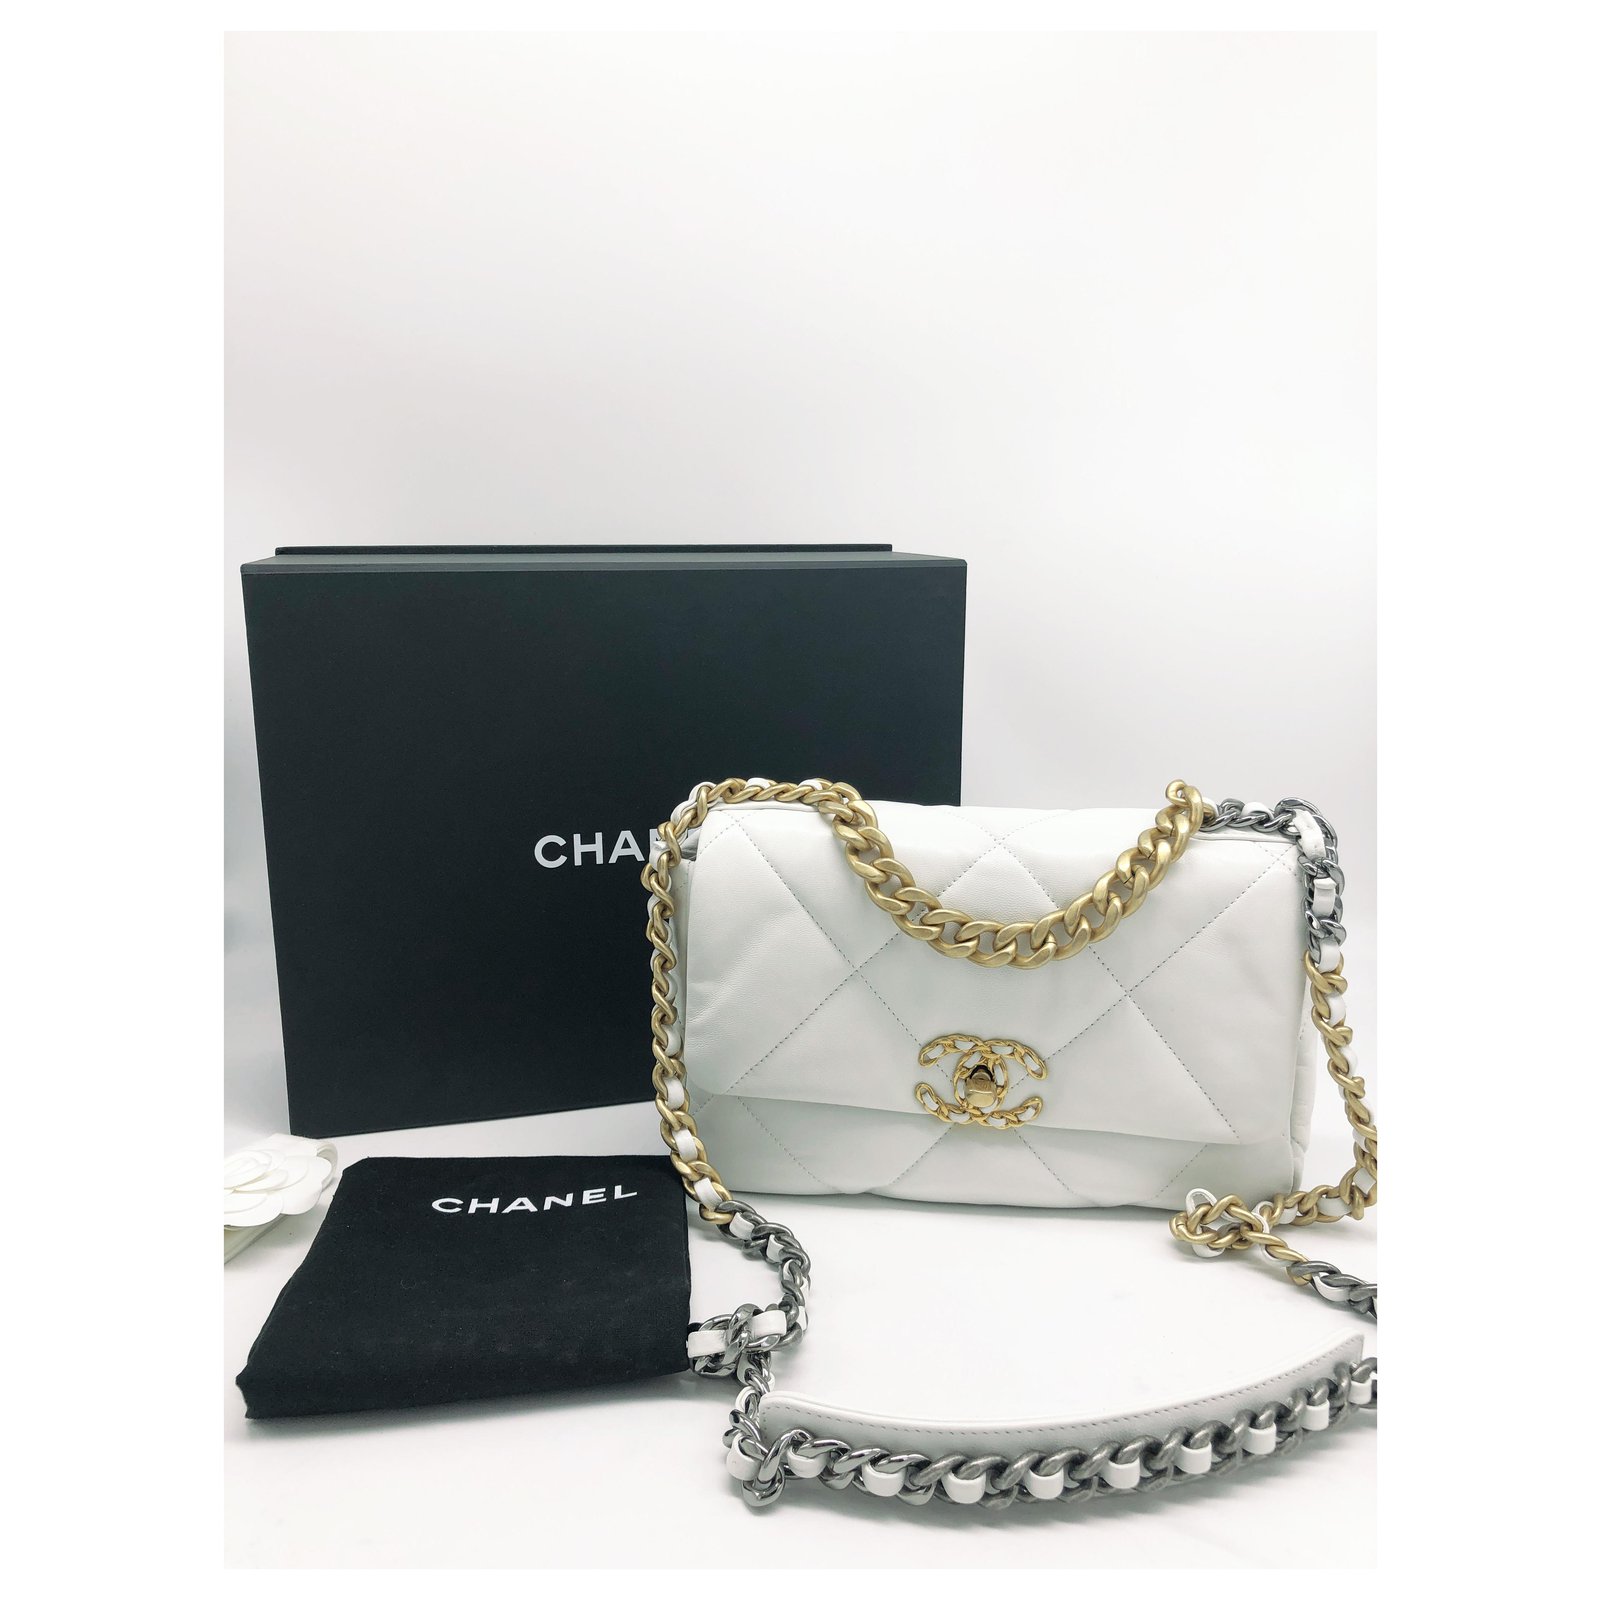 Chanel 19 Small Flap Bag Black Goatskin Mixed Hardware 20K – Coco Approved  Studio